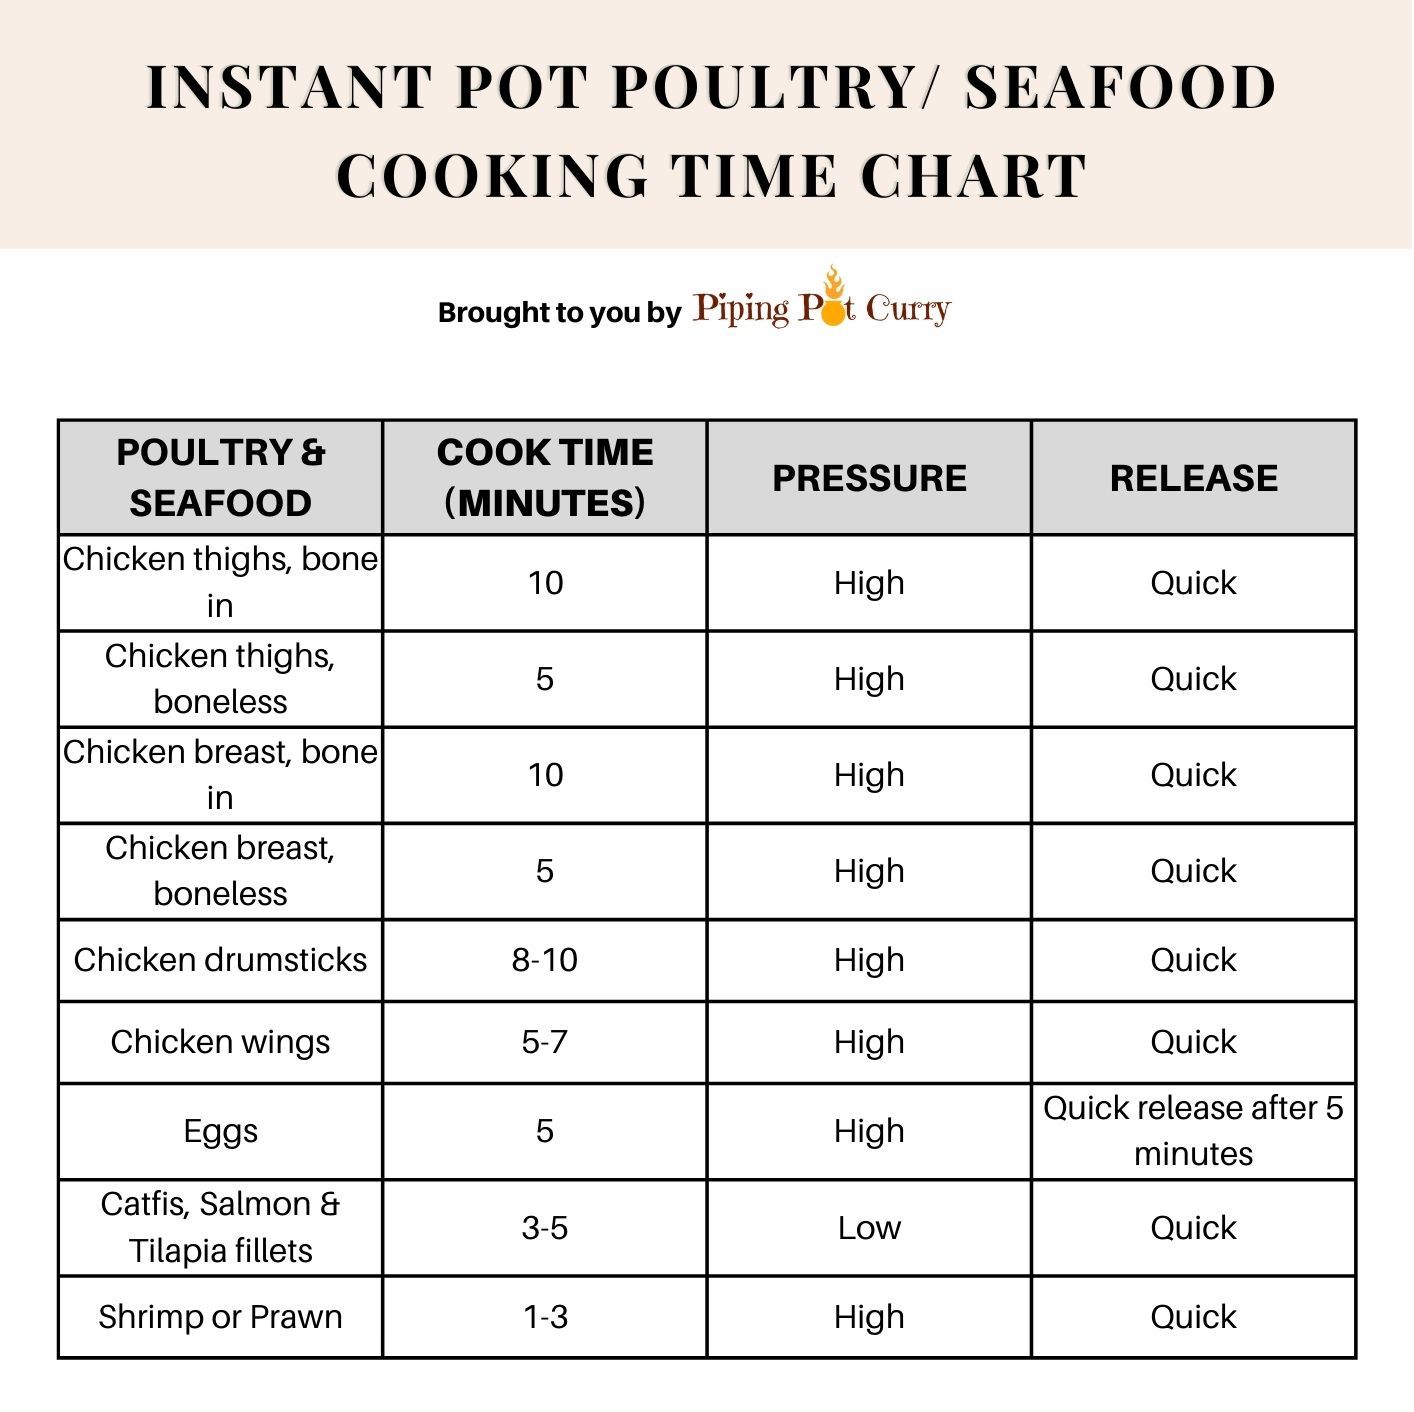 Instant pot Poultry/ seafood cooking time chartt